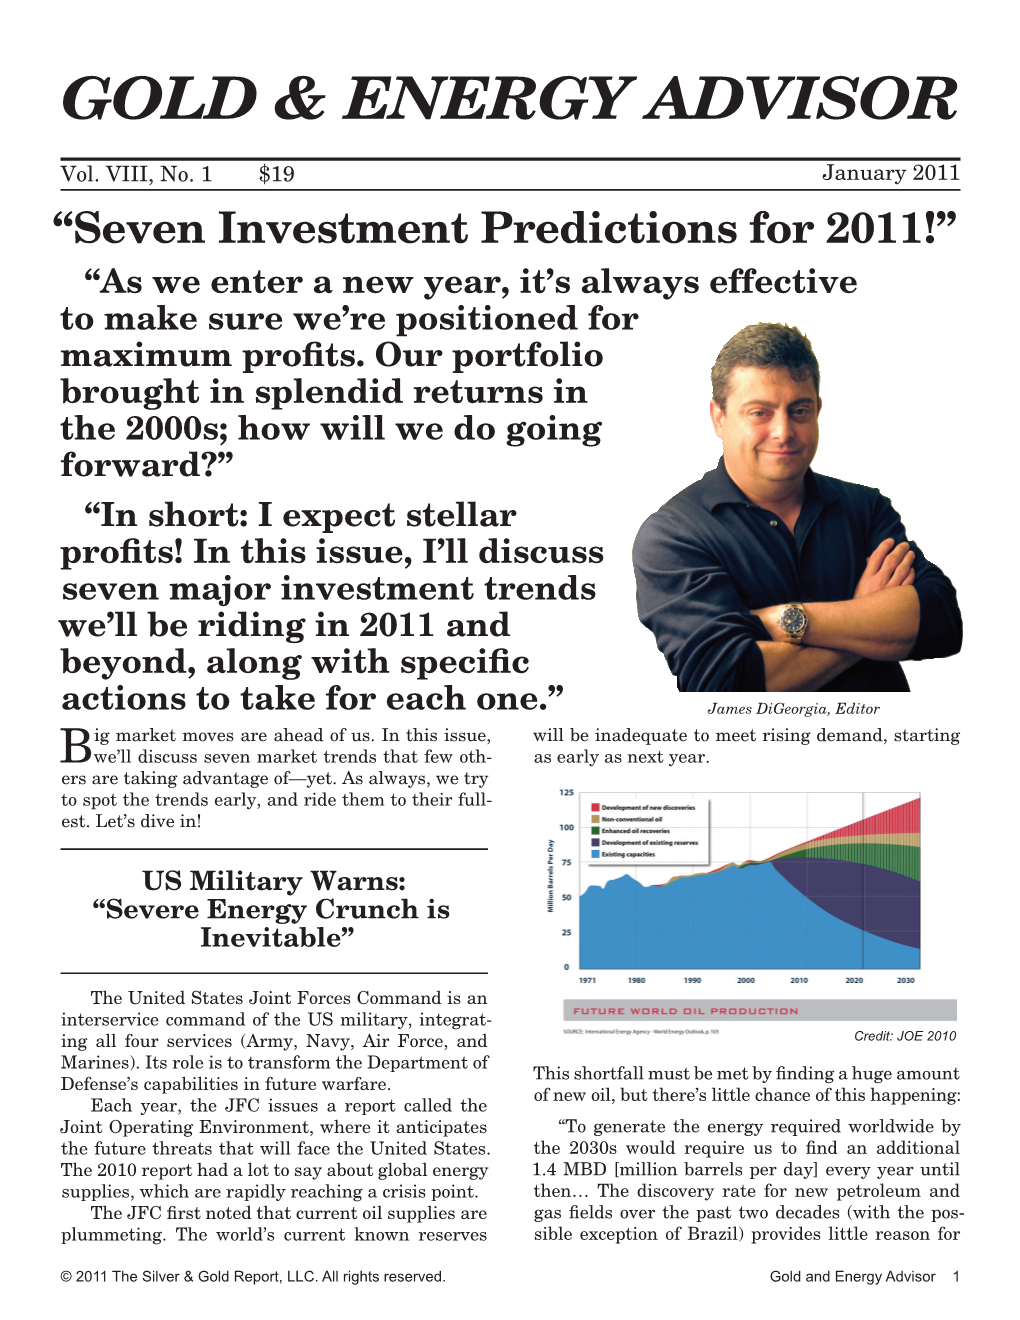 Seven Investment Predictions for 2011!” “As We Enter a New Year, It’S Always Effective to Make Sure We’Re Positioned for Maximum Profits